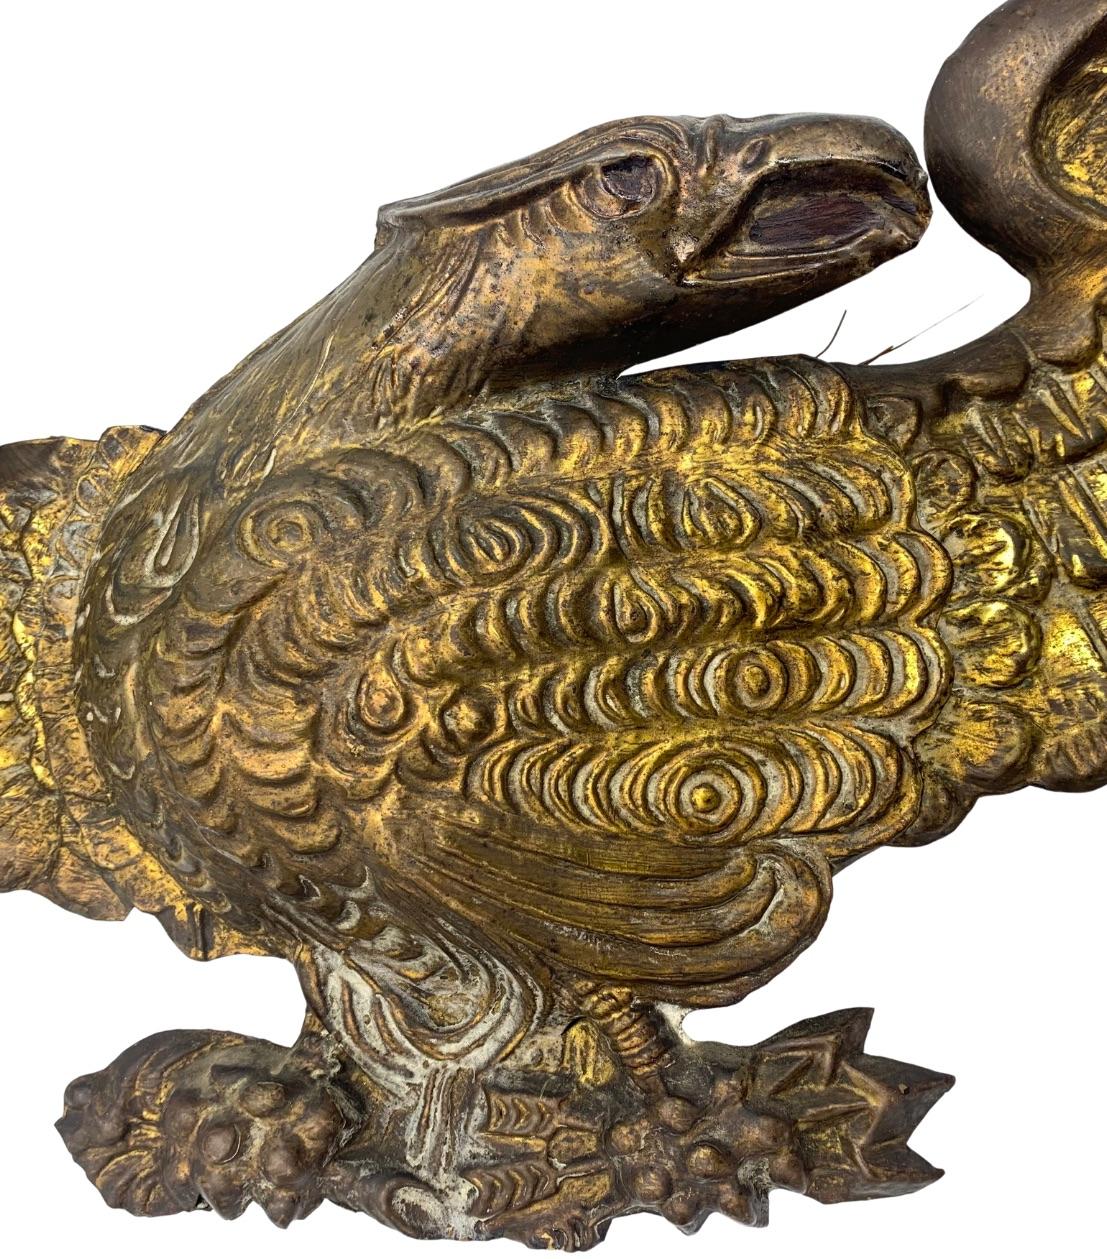 This is a vintage embossed brass American eagle, dating to the early 1900s. This is a striking eagle, with its wings fully outstretched. The eagle clutches an olive branch in its right talon and a bundle of arrows in the left. Traditionally, the